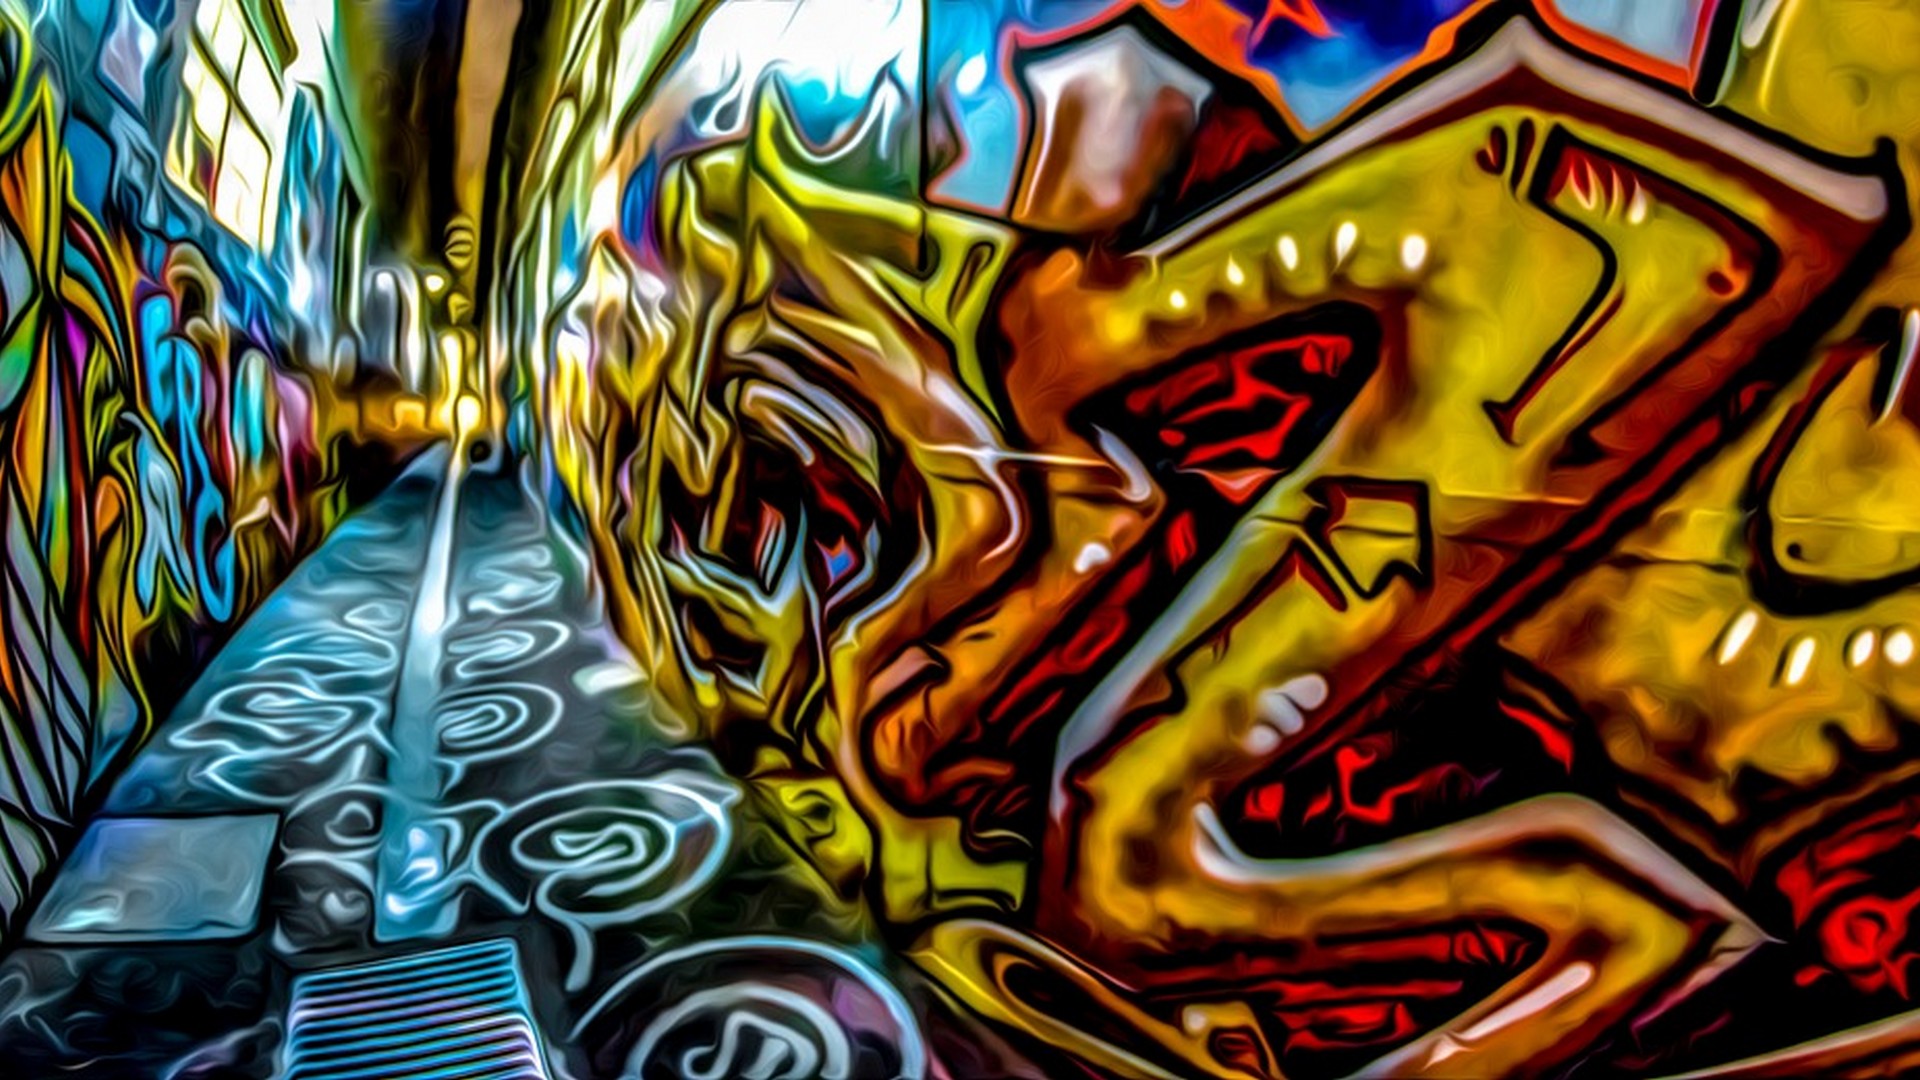 Graffiti Characters Desktop Backgrounds With Resolution 1920X1080 pixel. You can make this wallpaper for your Desktop Computer Backgrounds, Mac Wallpapers, Android Lock screen or iPhone Screensavers